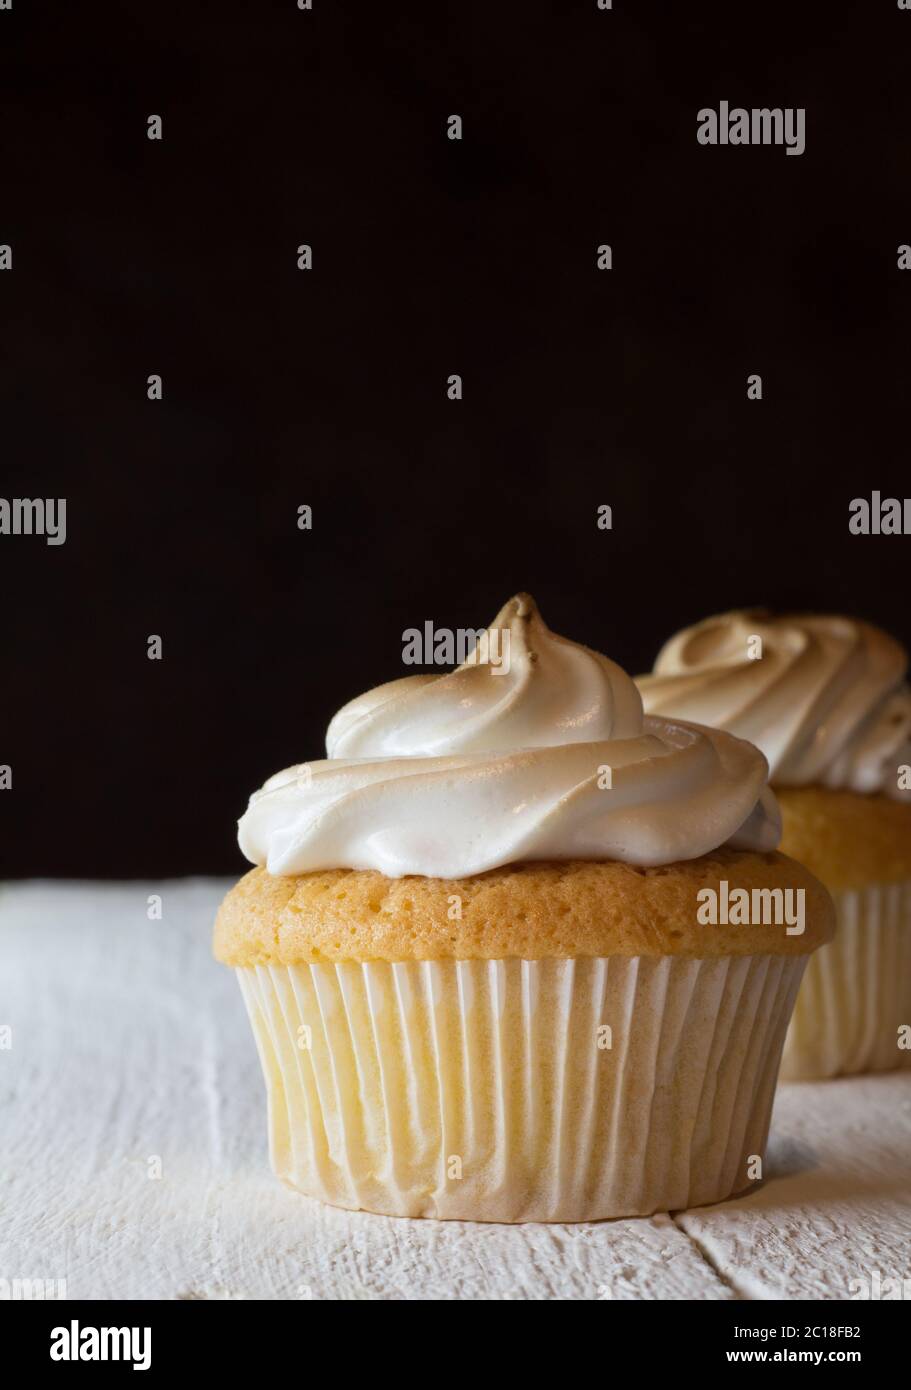 Cup cake with egg white meringue topping on white wooden table and one defocused against a dark bacg Stock Photo